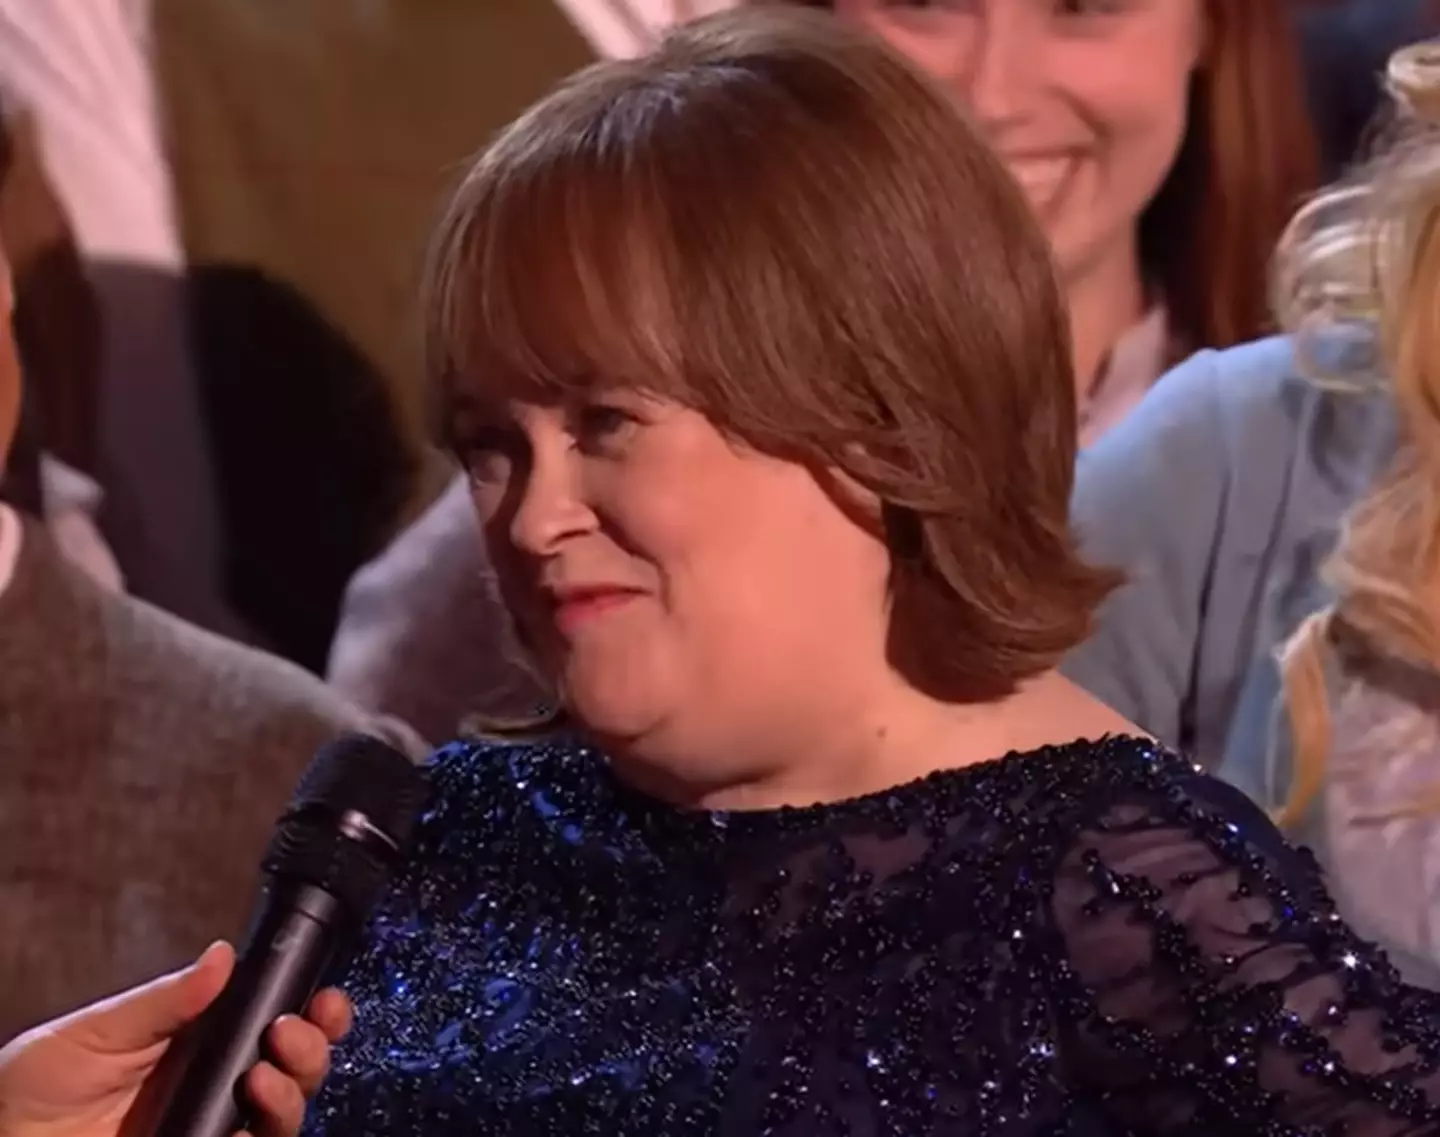 Britain's Got Talent fans were overjoyed to see Susan Boyle back on the show.